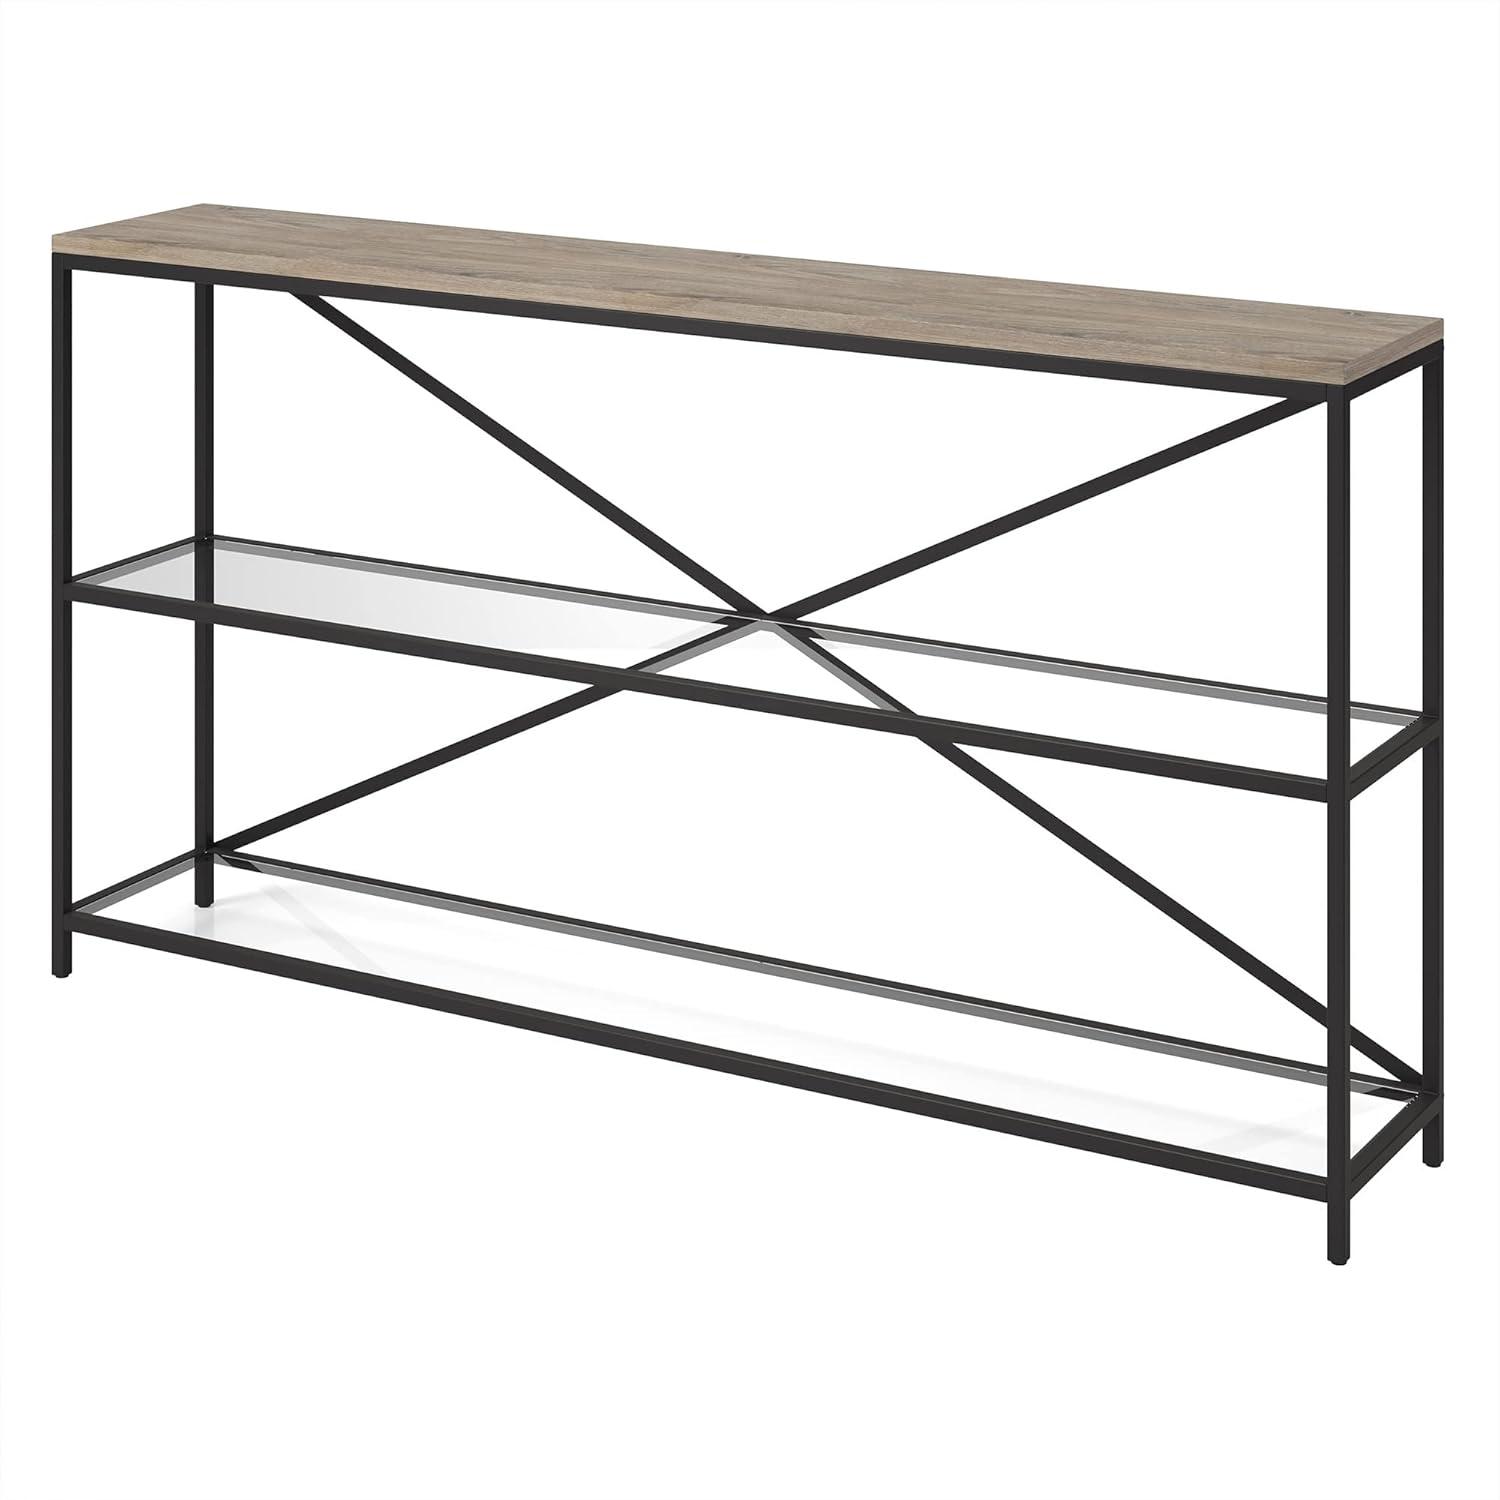 Fionn Blackened Bronze & Antiqued Gray Oak 55" Console Table with Glass Shelves